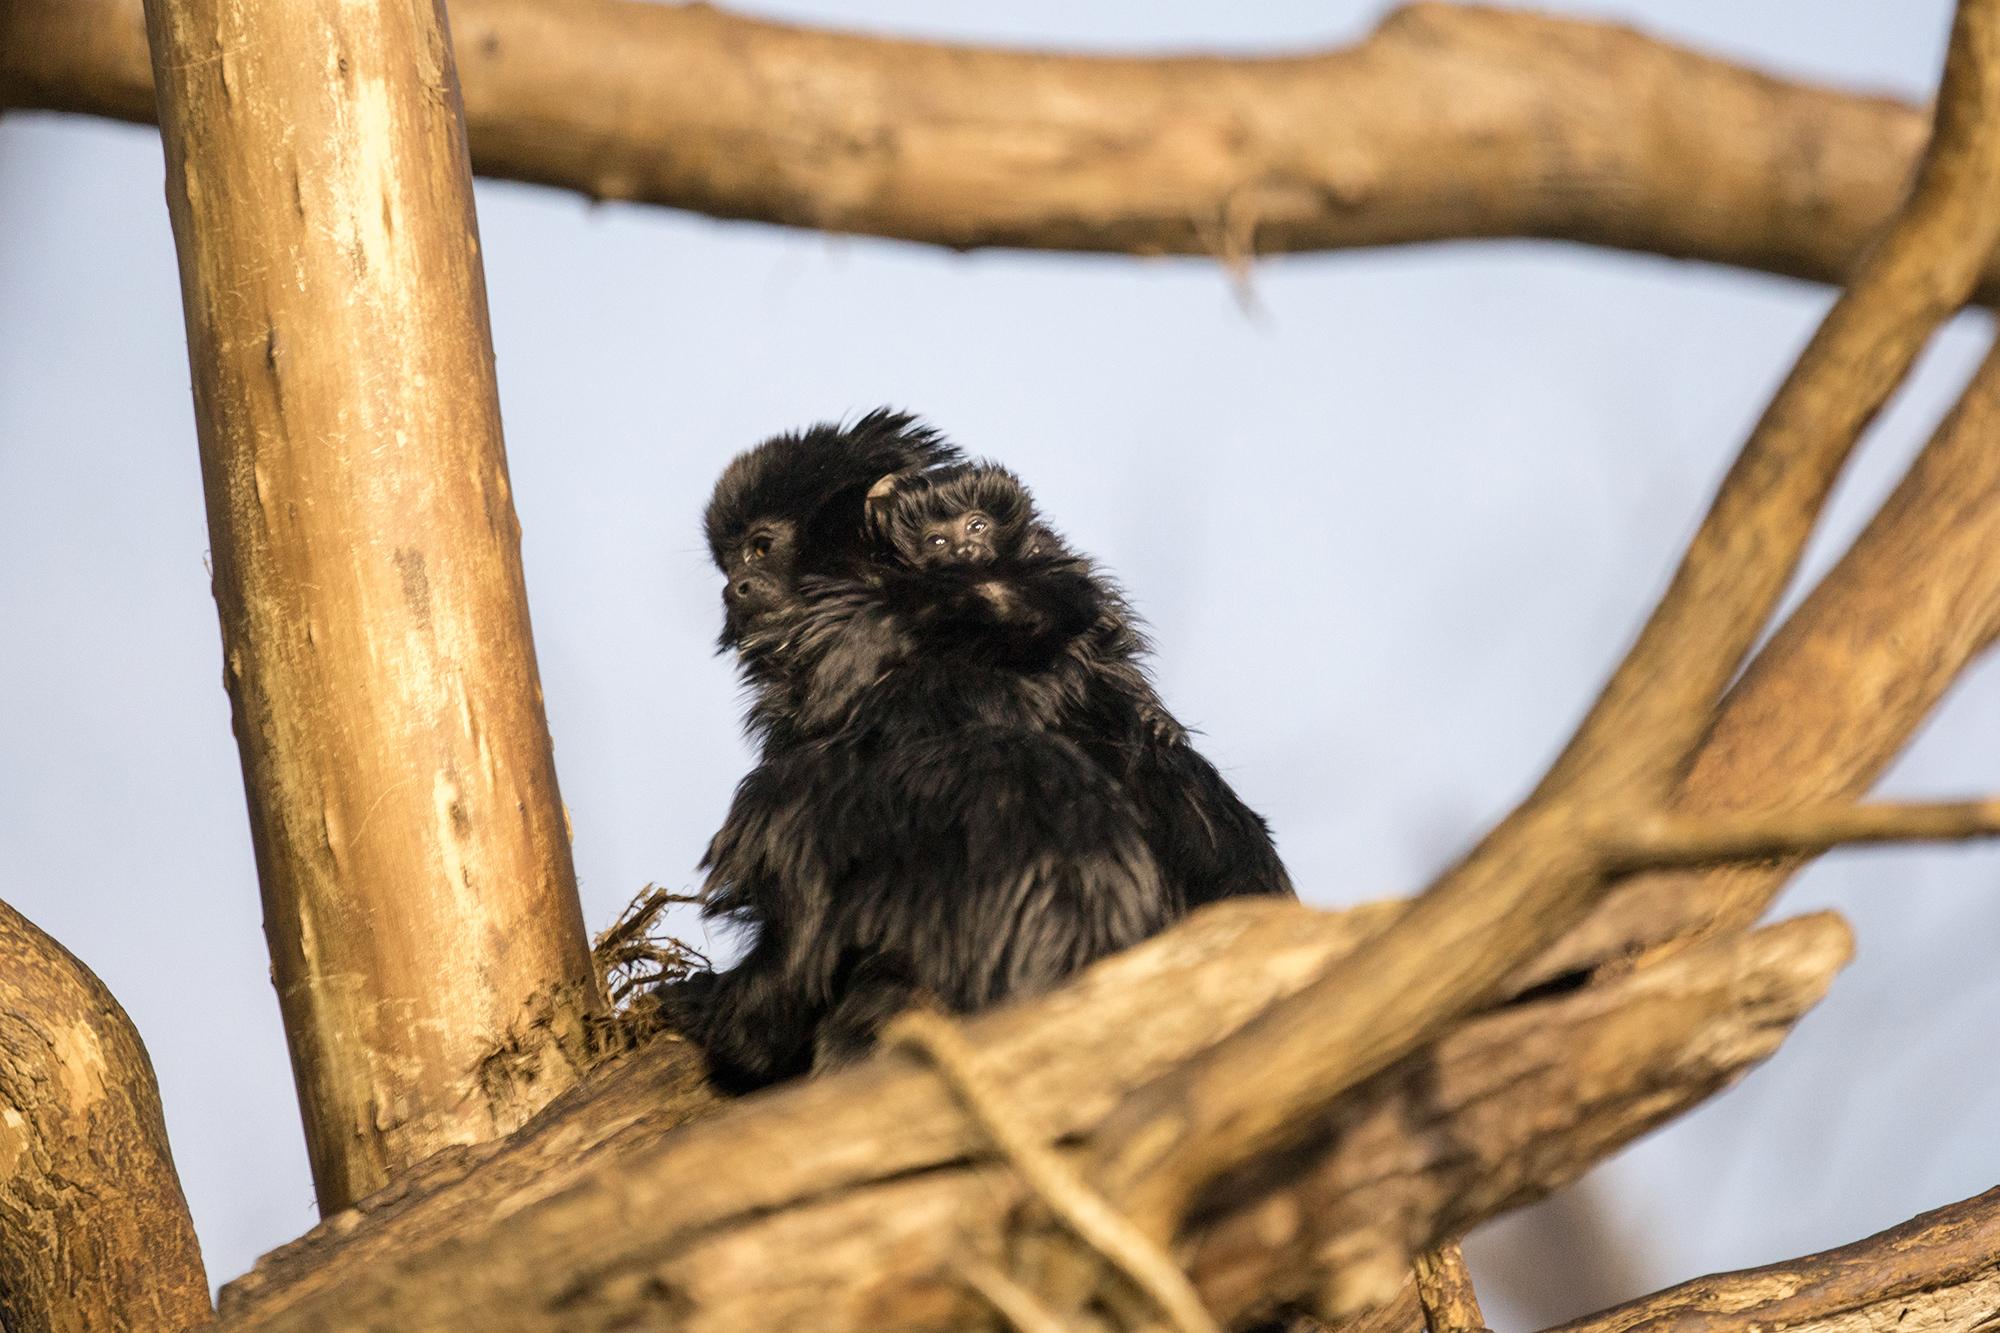 Lincoln Park Zoo's newborn Goeldi's monkey is barely visible as it clings to its mother's neck. (Julia Fuller / Lincoln Park Zoo) 